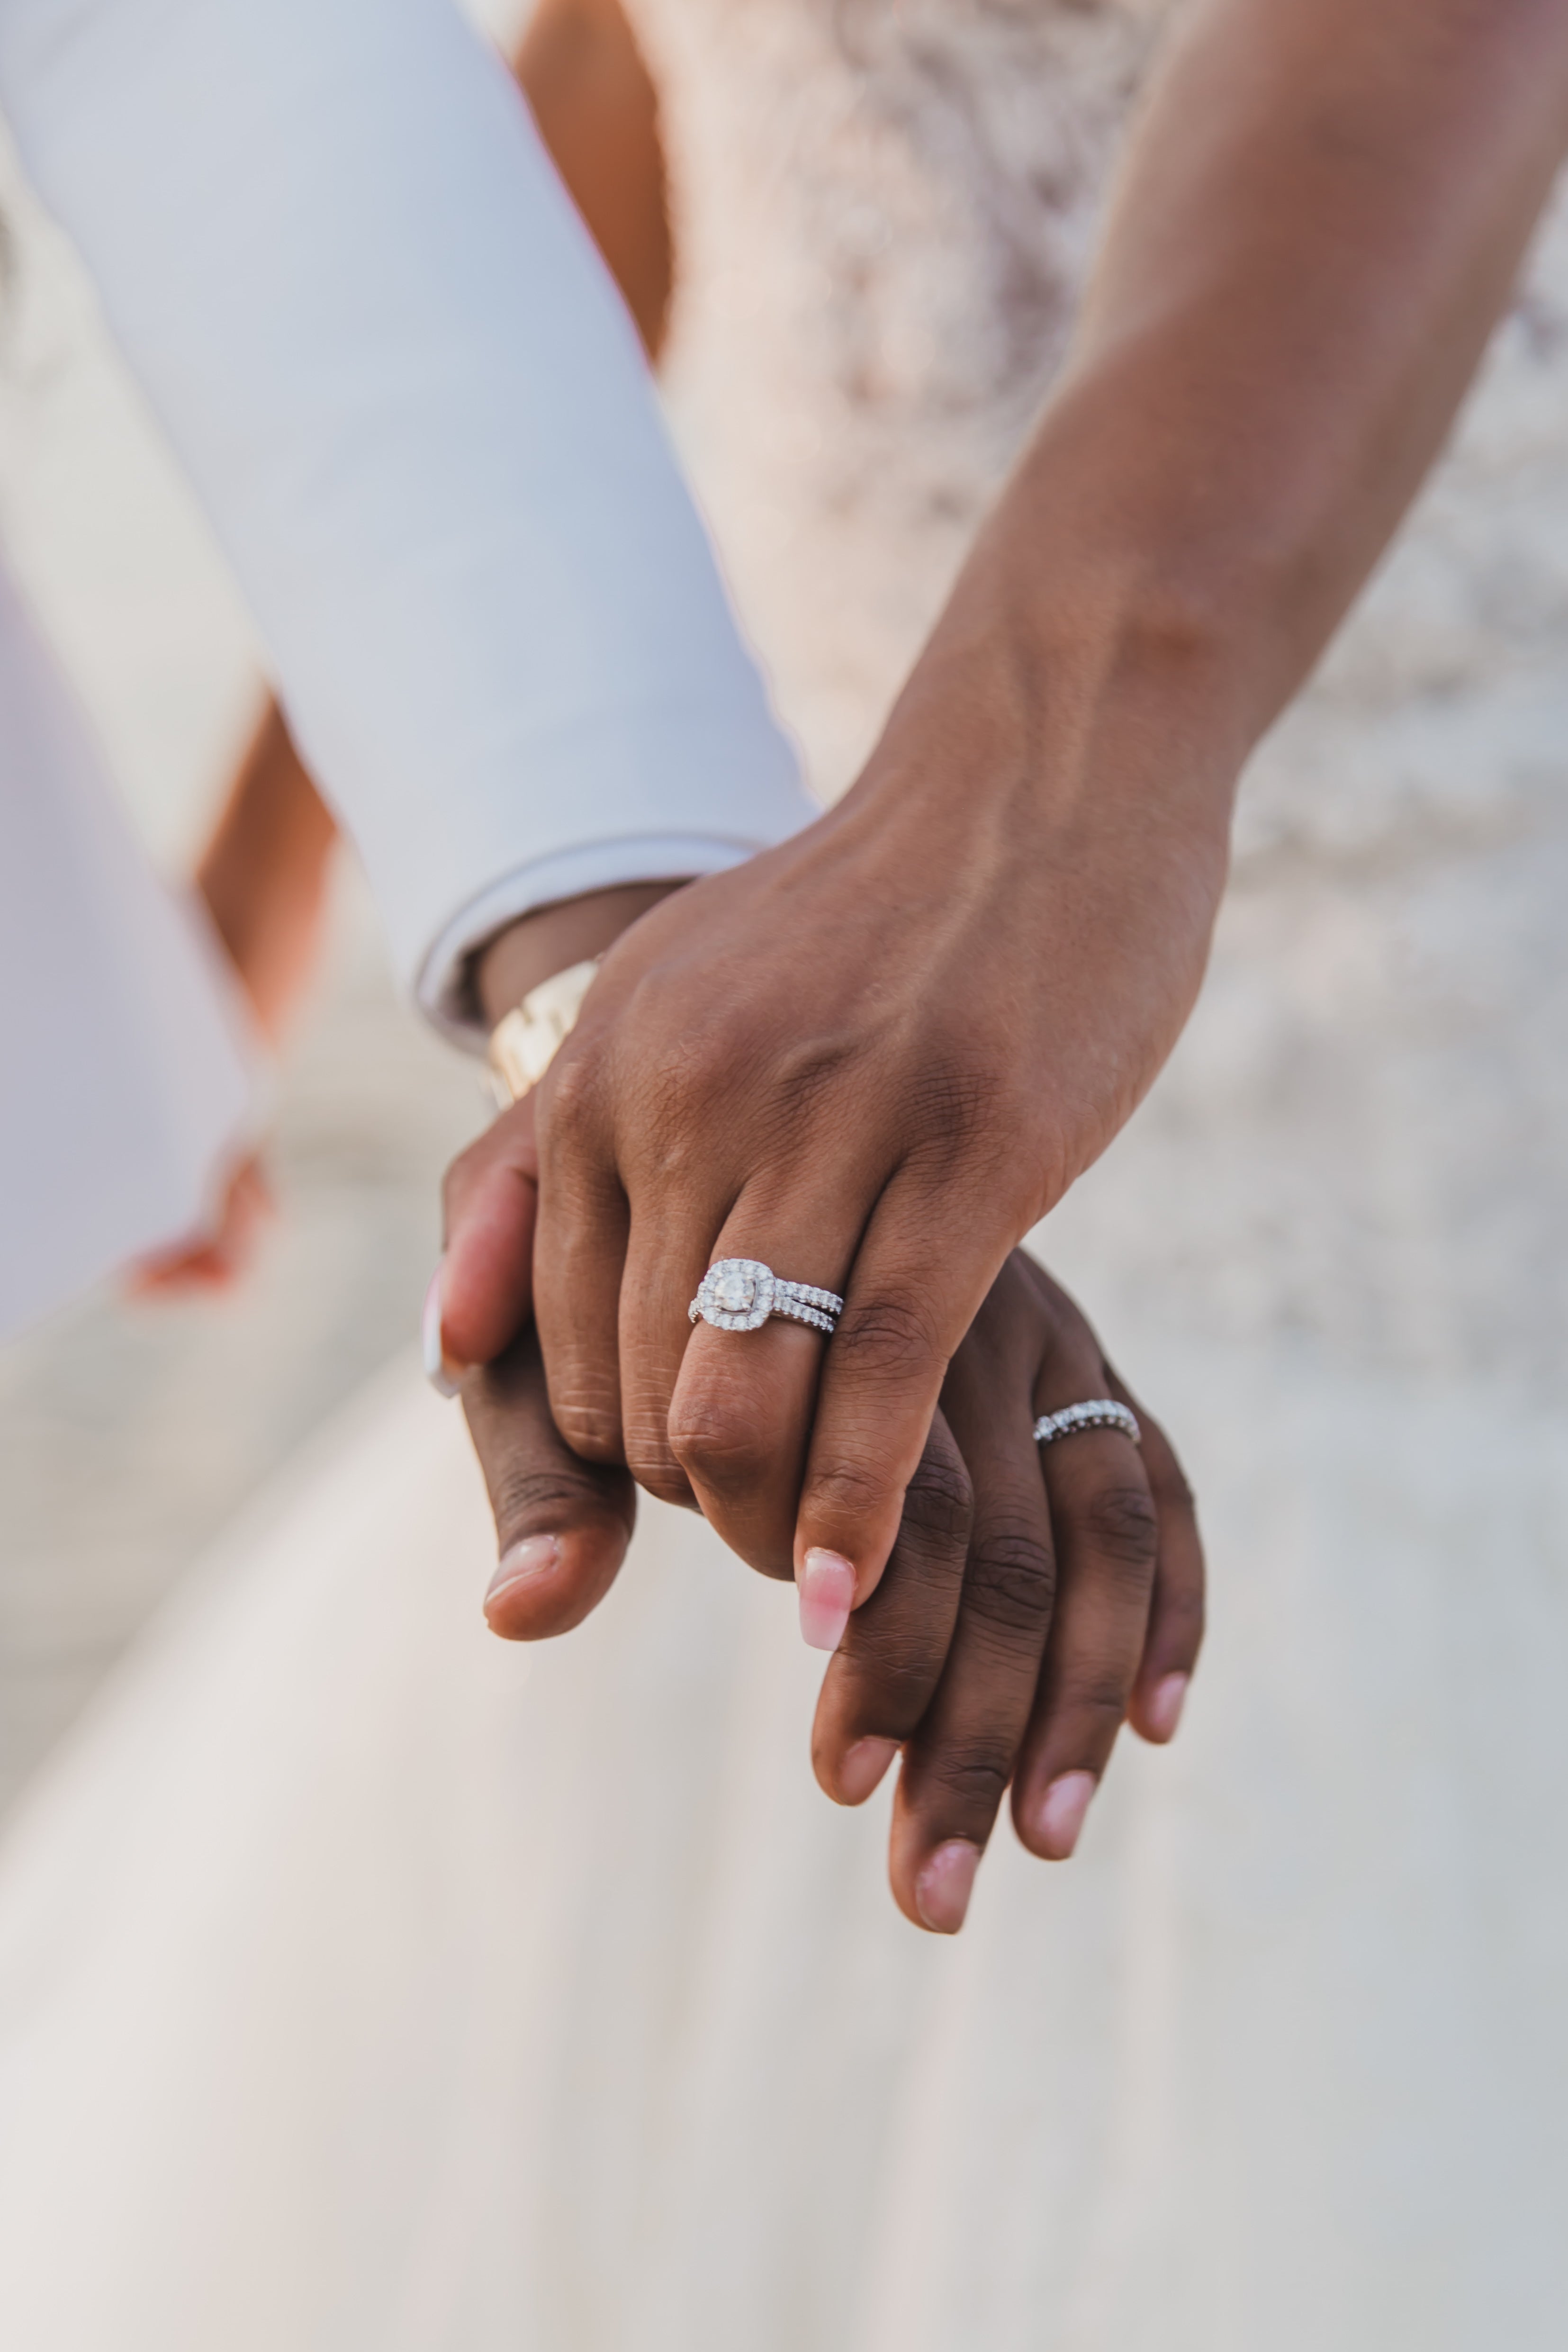 Bridal Bliss: Chantel And Shavonia’s Love Shined Through Their Stunning Wedding Photos